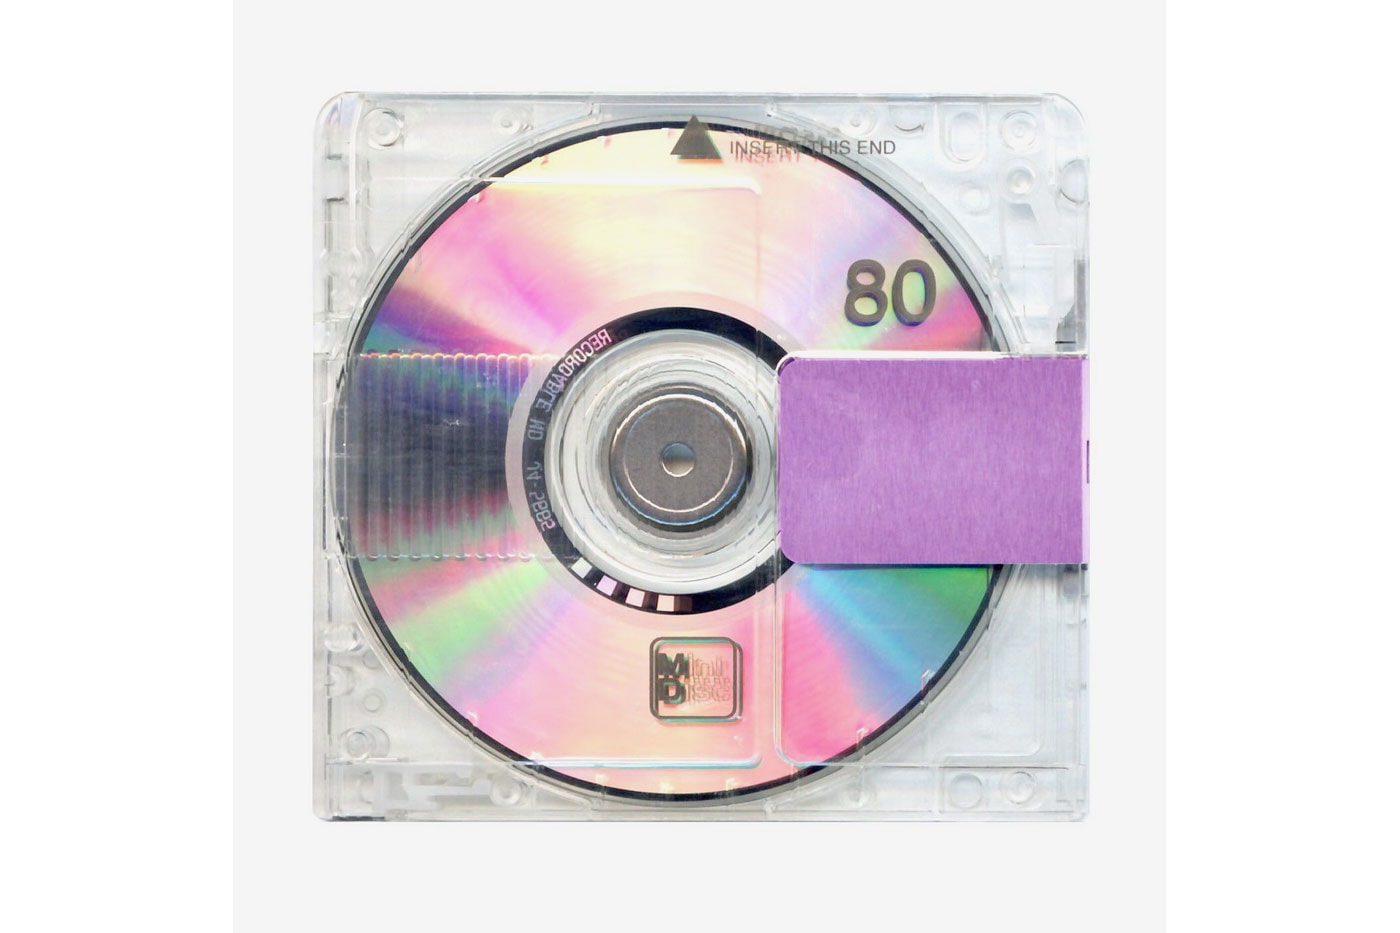 Kanye West 'YANDHI" Holographic Album Cover Art video yeezus 2 music iphone minidisc cd release date september